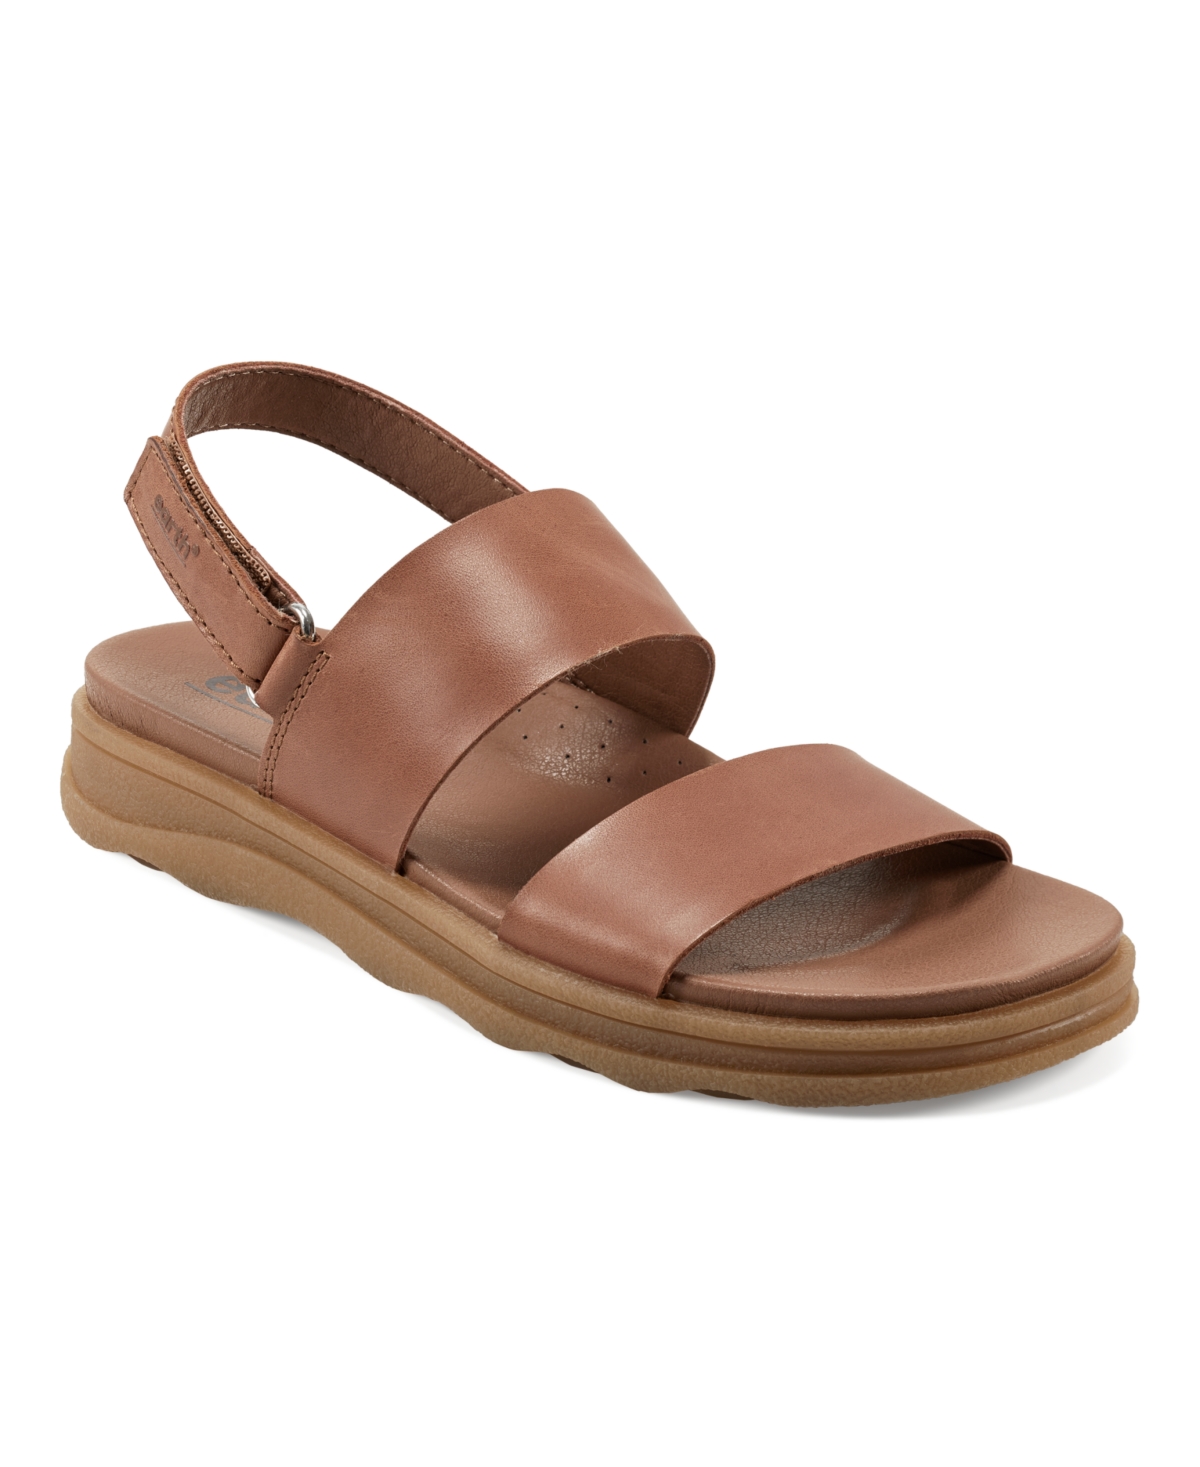 Earth Women's Leah Round Toe Strappy Casual Flat Sandals - Dusty Rose Leather